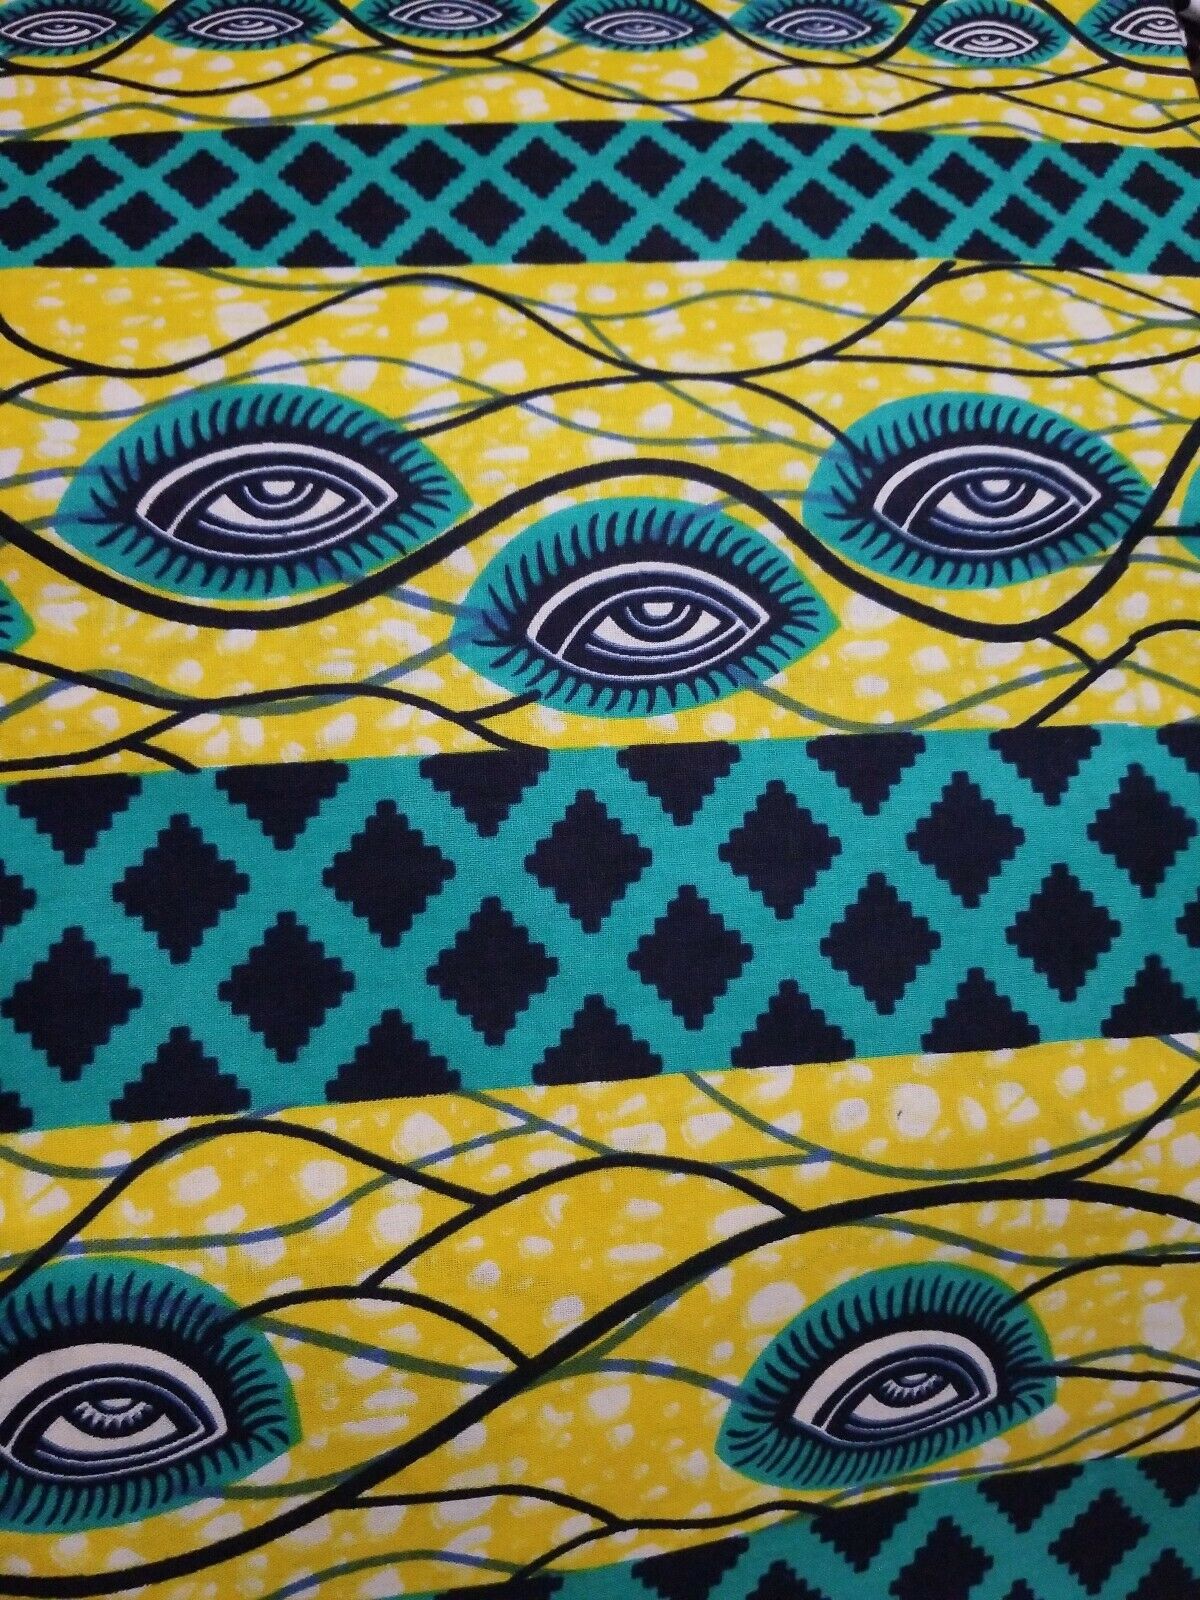 MULTICOLOR African Wax Print 100% Cotton Fabric (44 in.) 3yrds $17